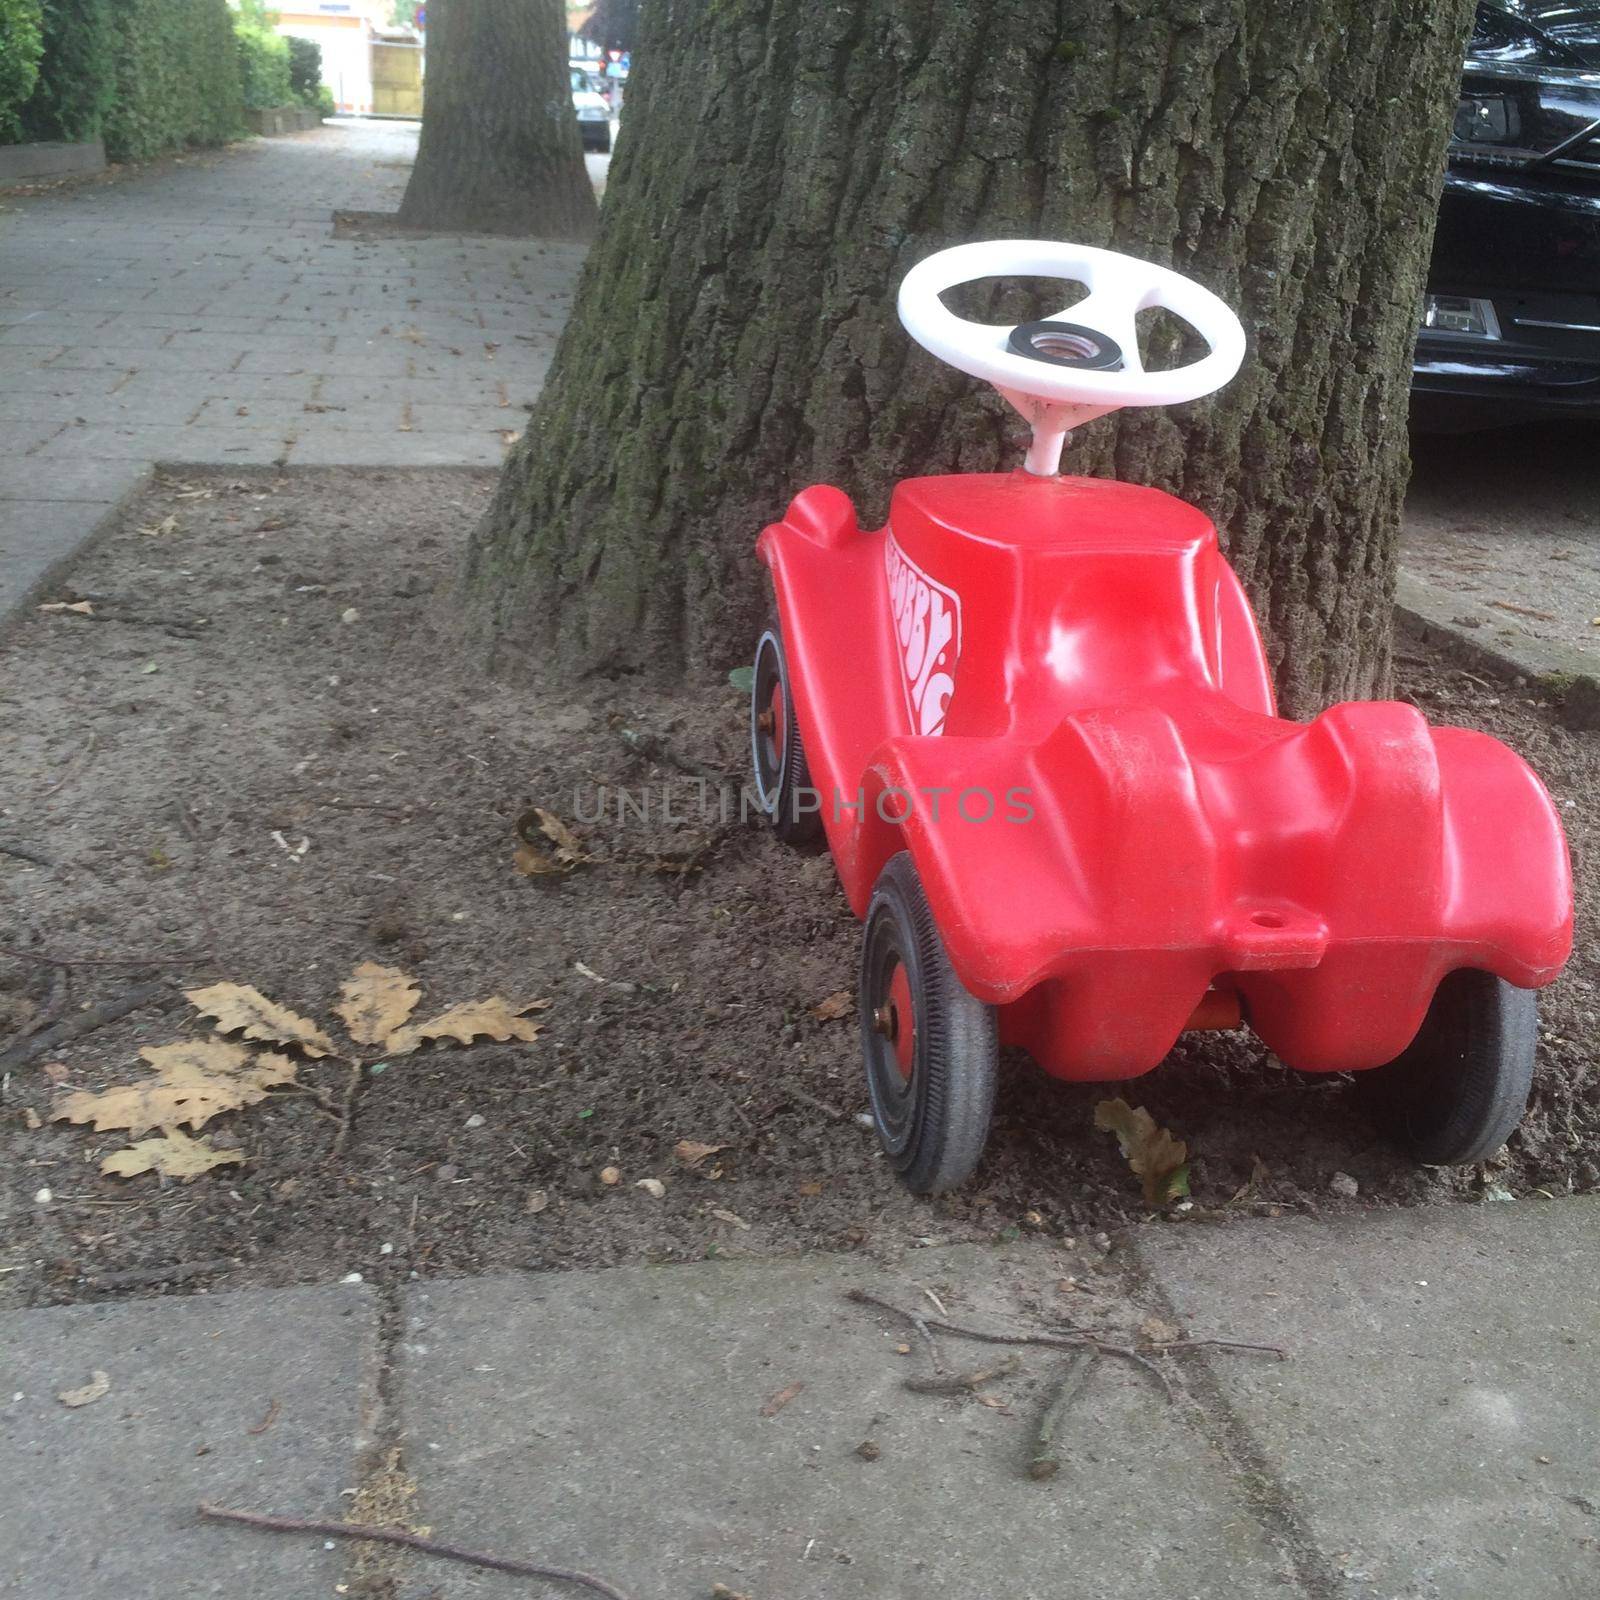 Little red toy car parked against a tree in a street by LeoniekvanderVliet